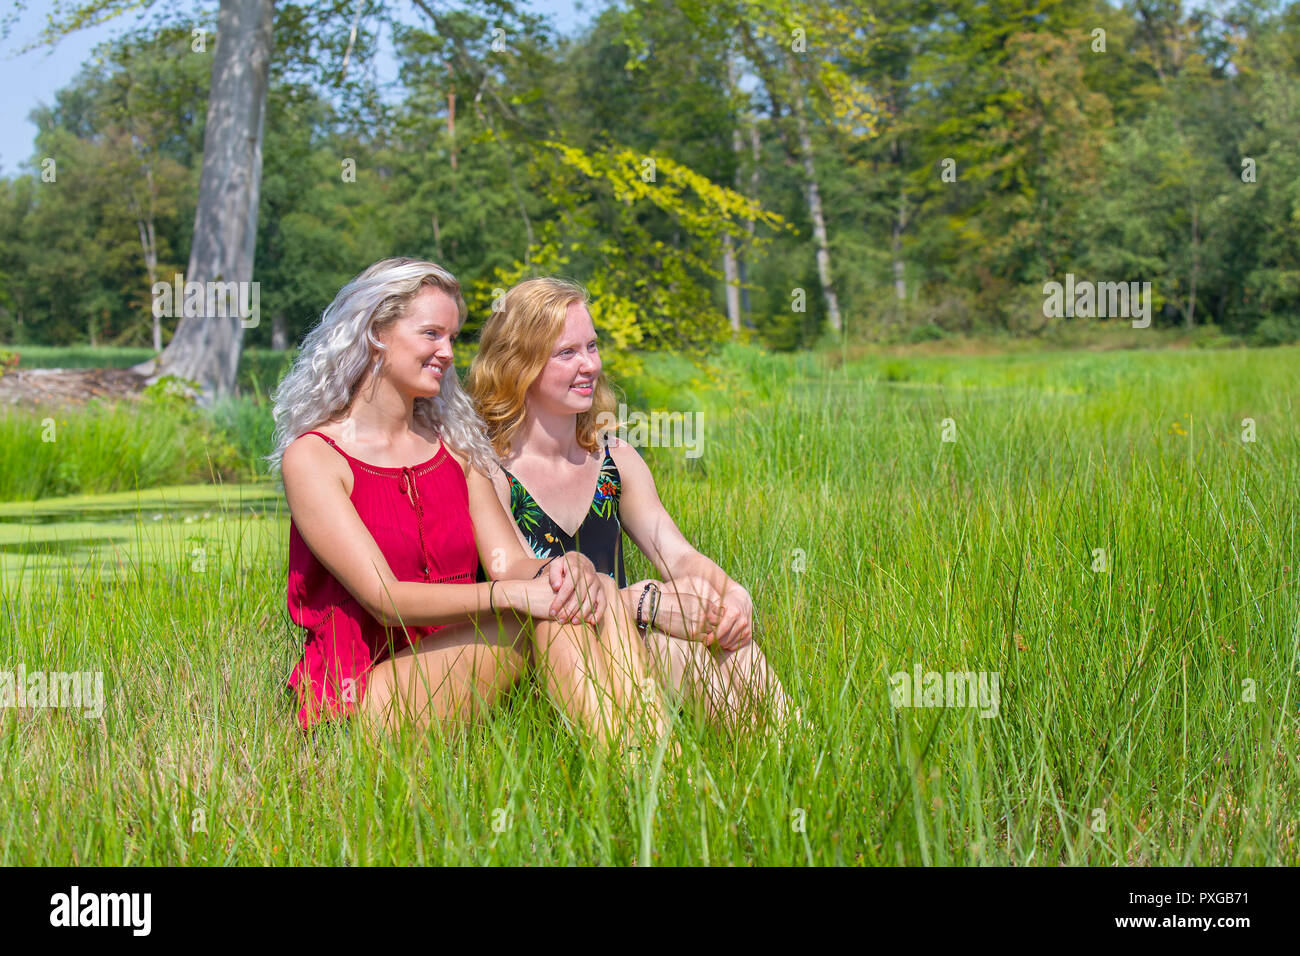 Blond and red-haired woman sitting together in natural meadow Stock Photo